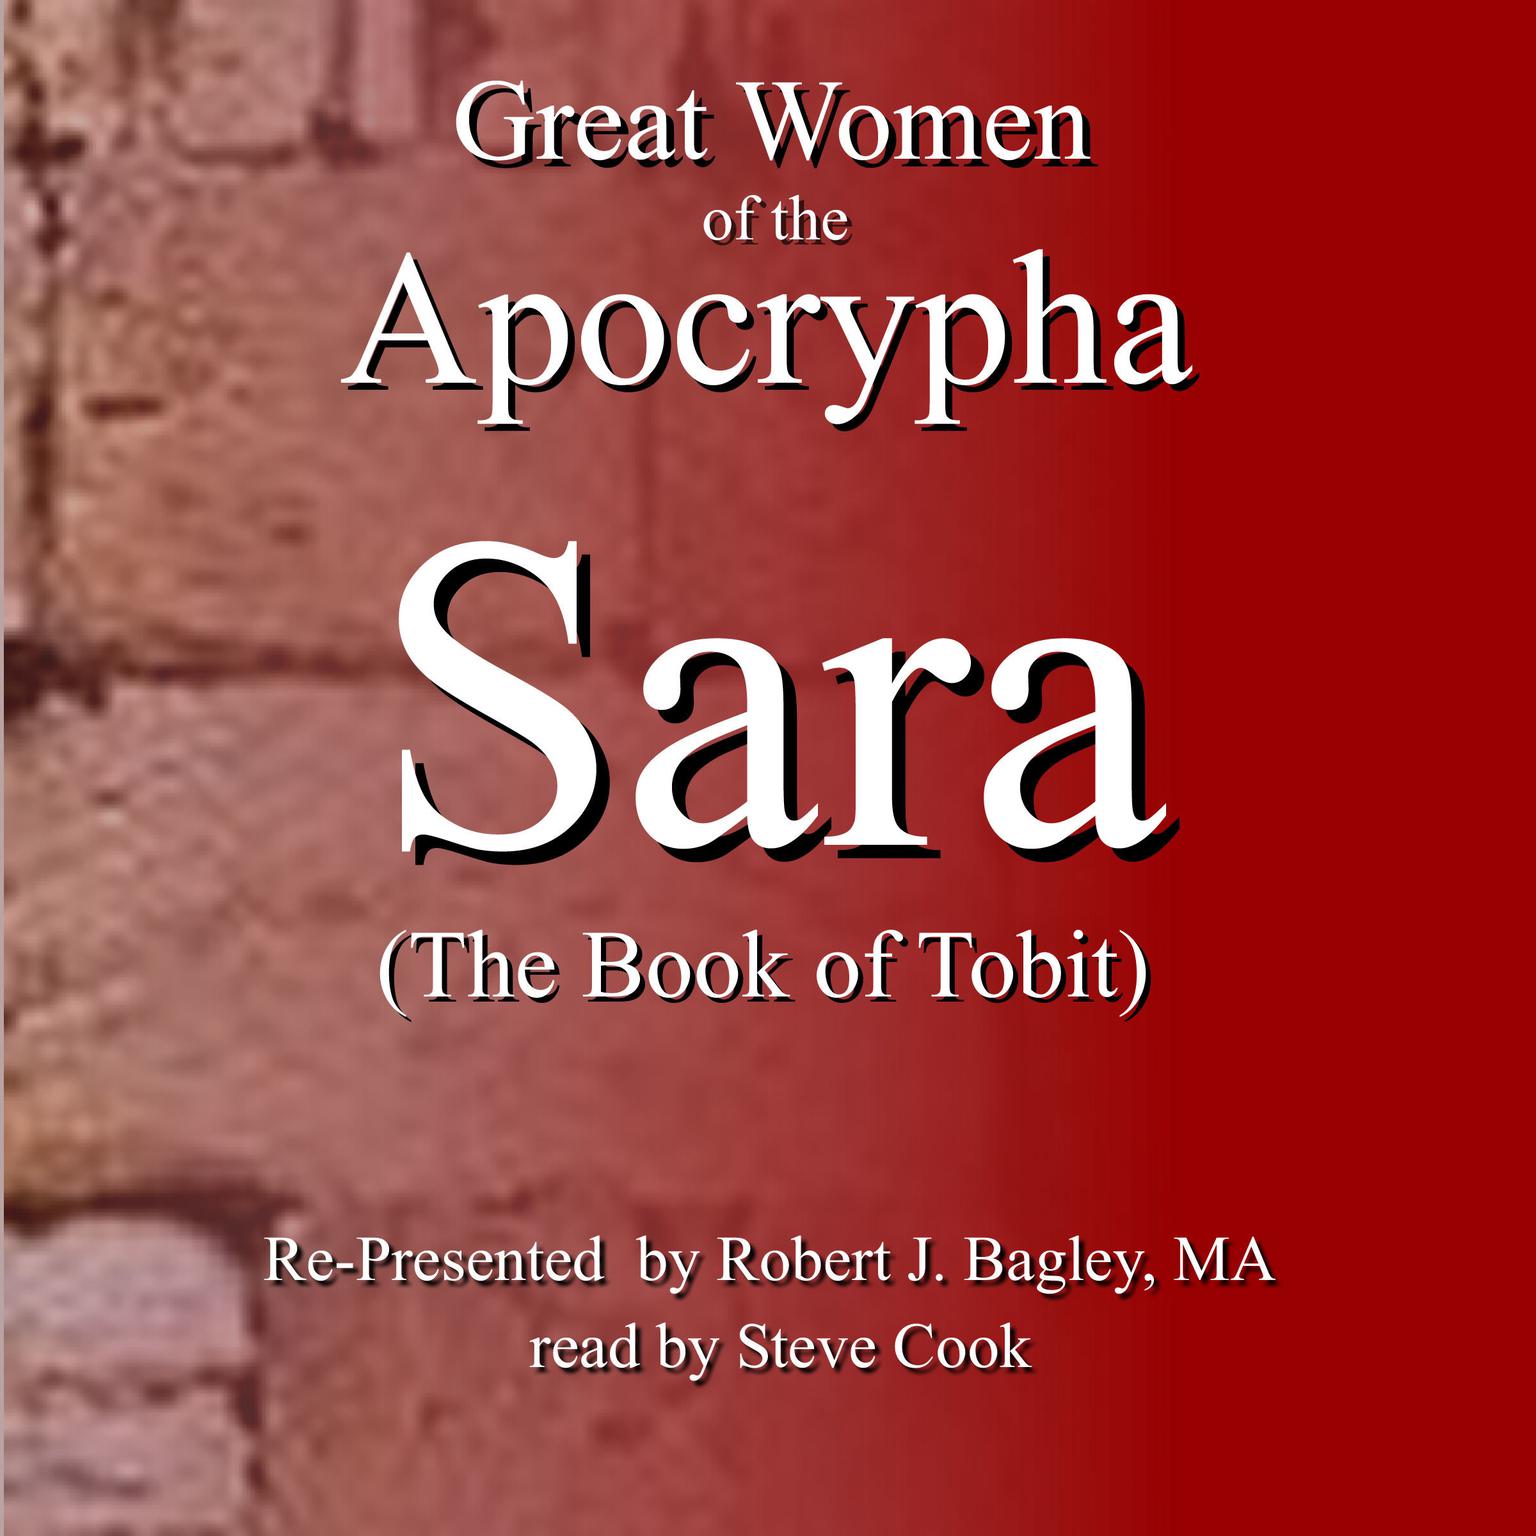 Great Women of the Apocrypha: Sara (The Book of Tobit) Audiobook, by Robert J. Bagley